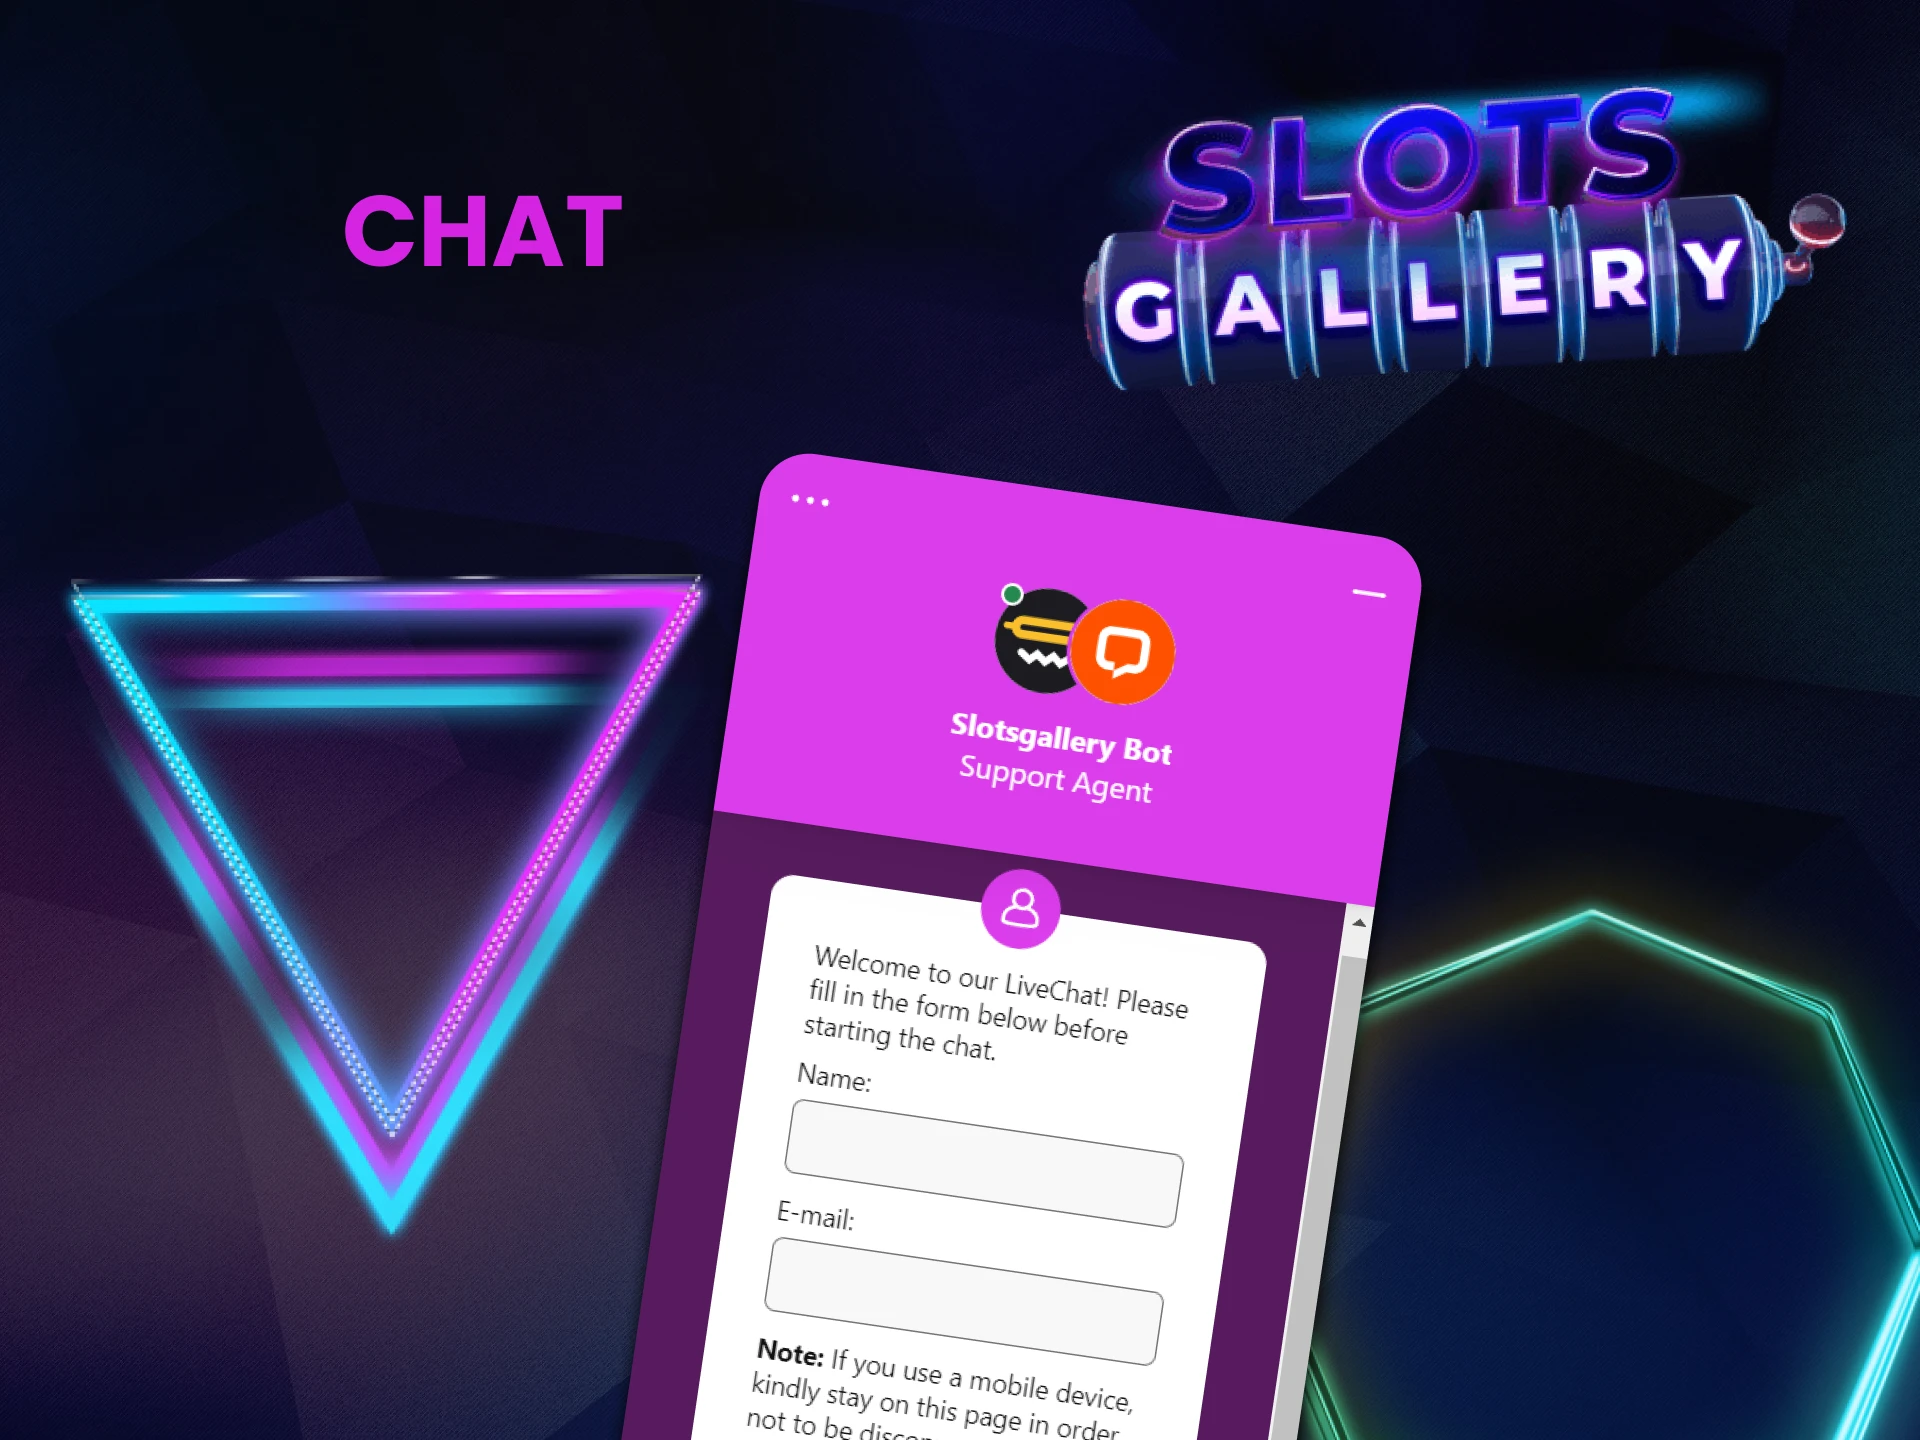 To contact the Slots Gallery team, use chat.